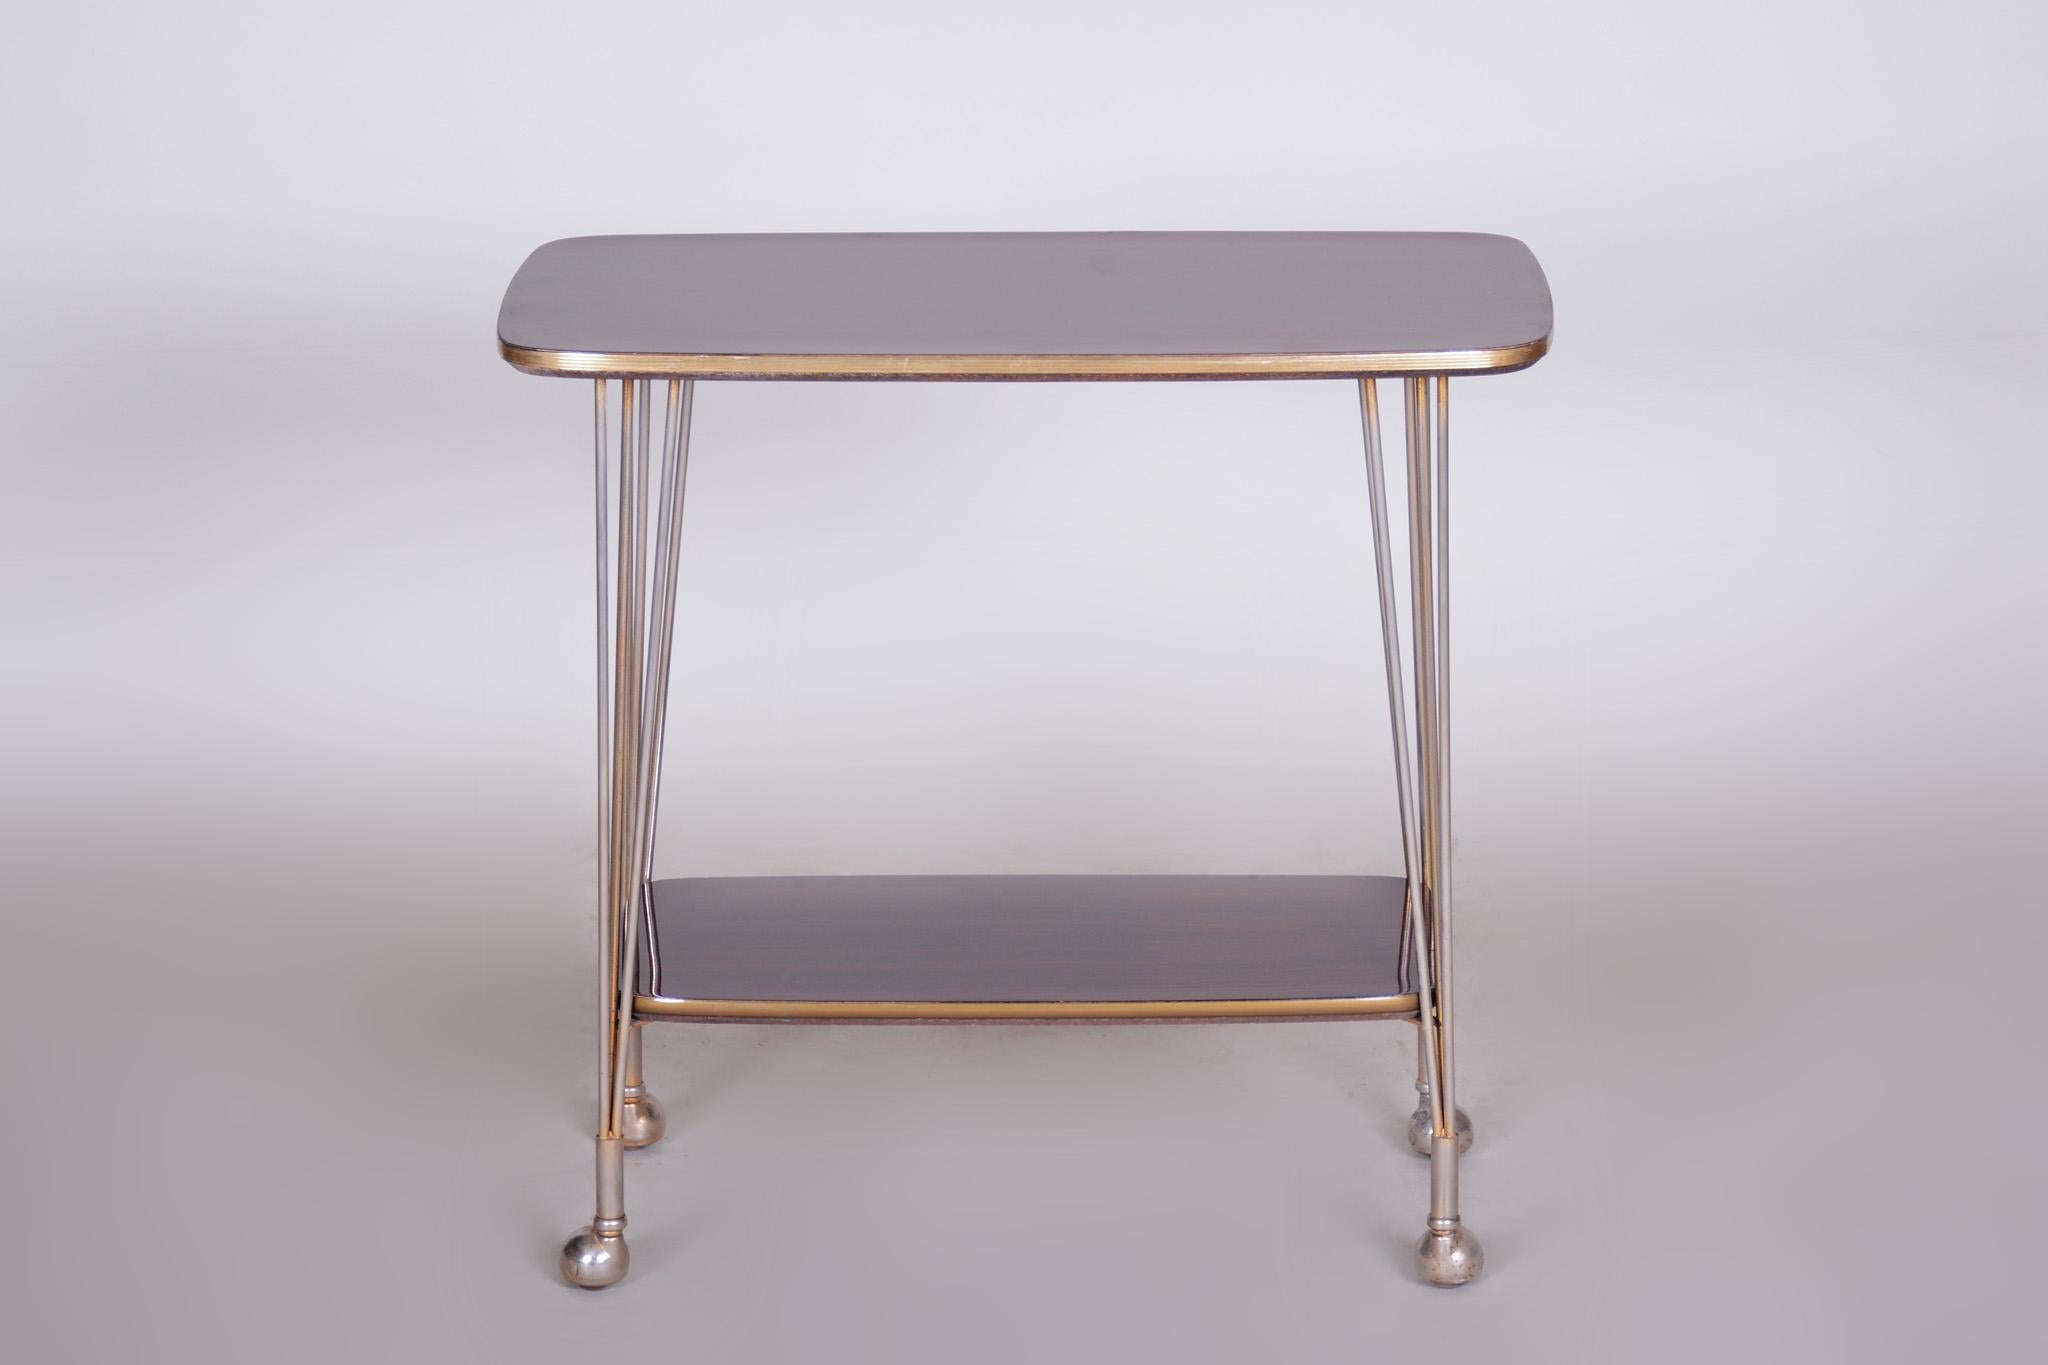 20th Century Art Deco Mahogany Trolley Table, Brass, Excellent Condition, 1950s For Sale 2